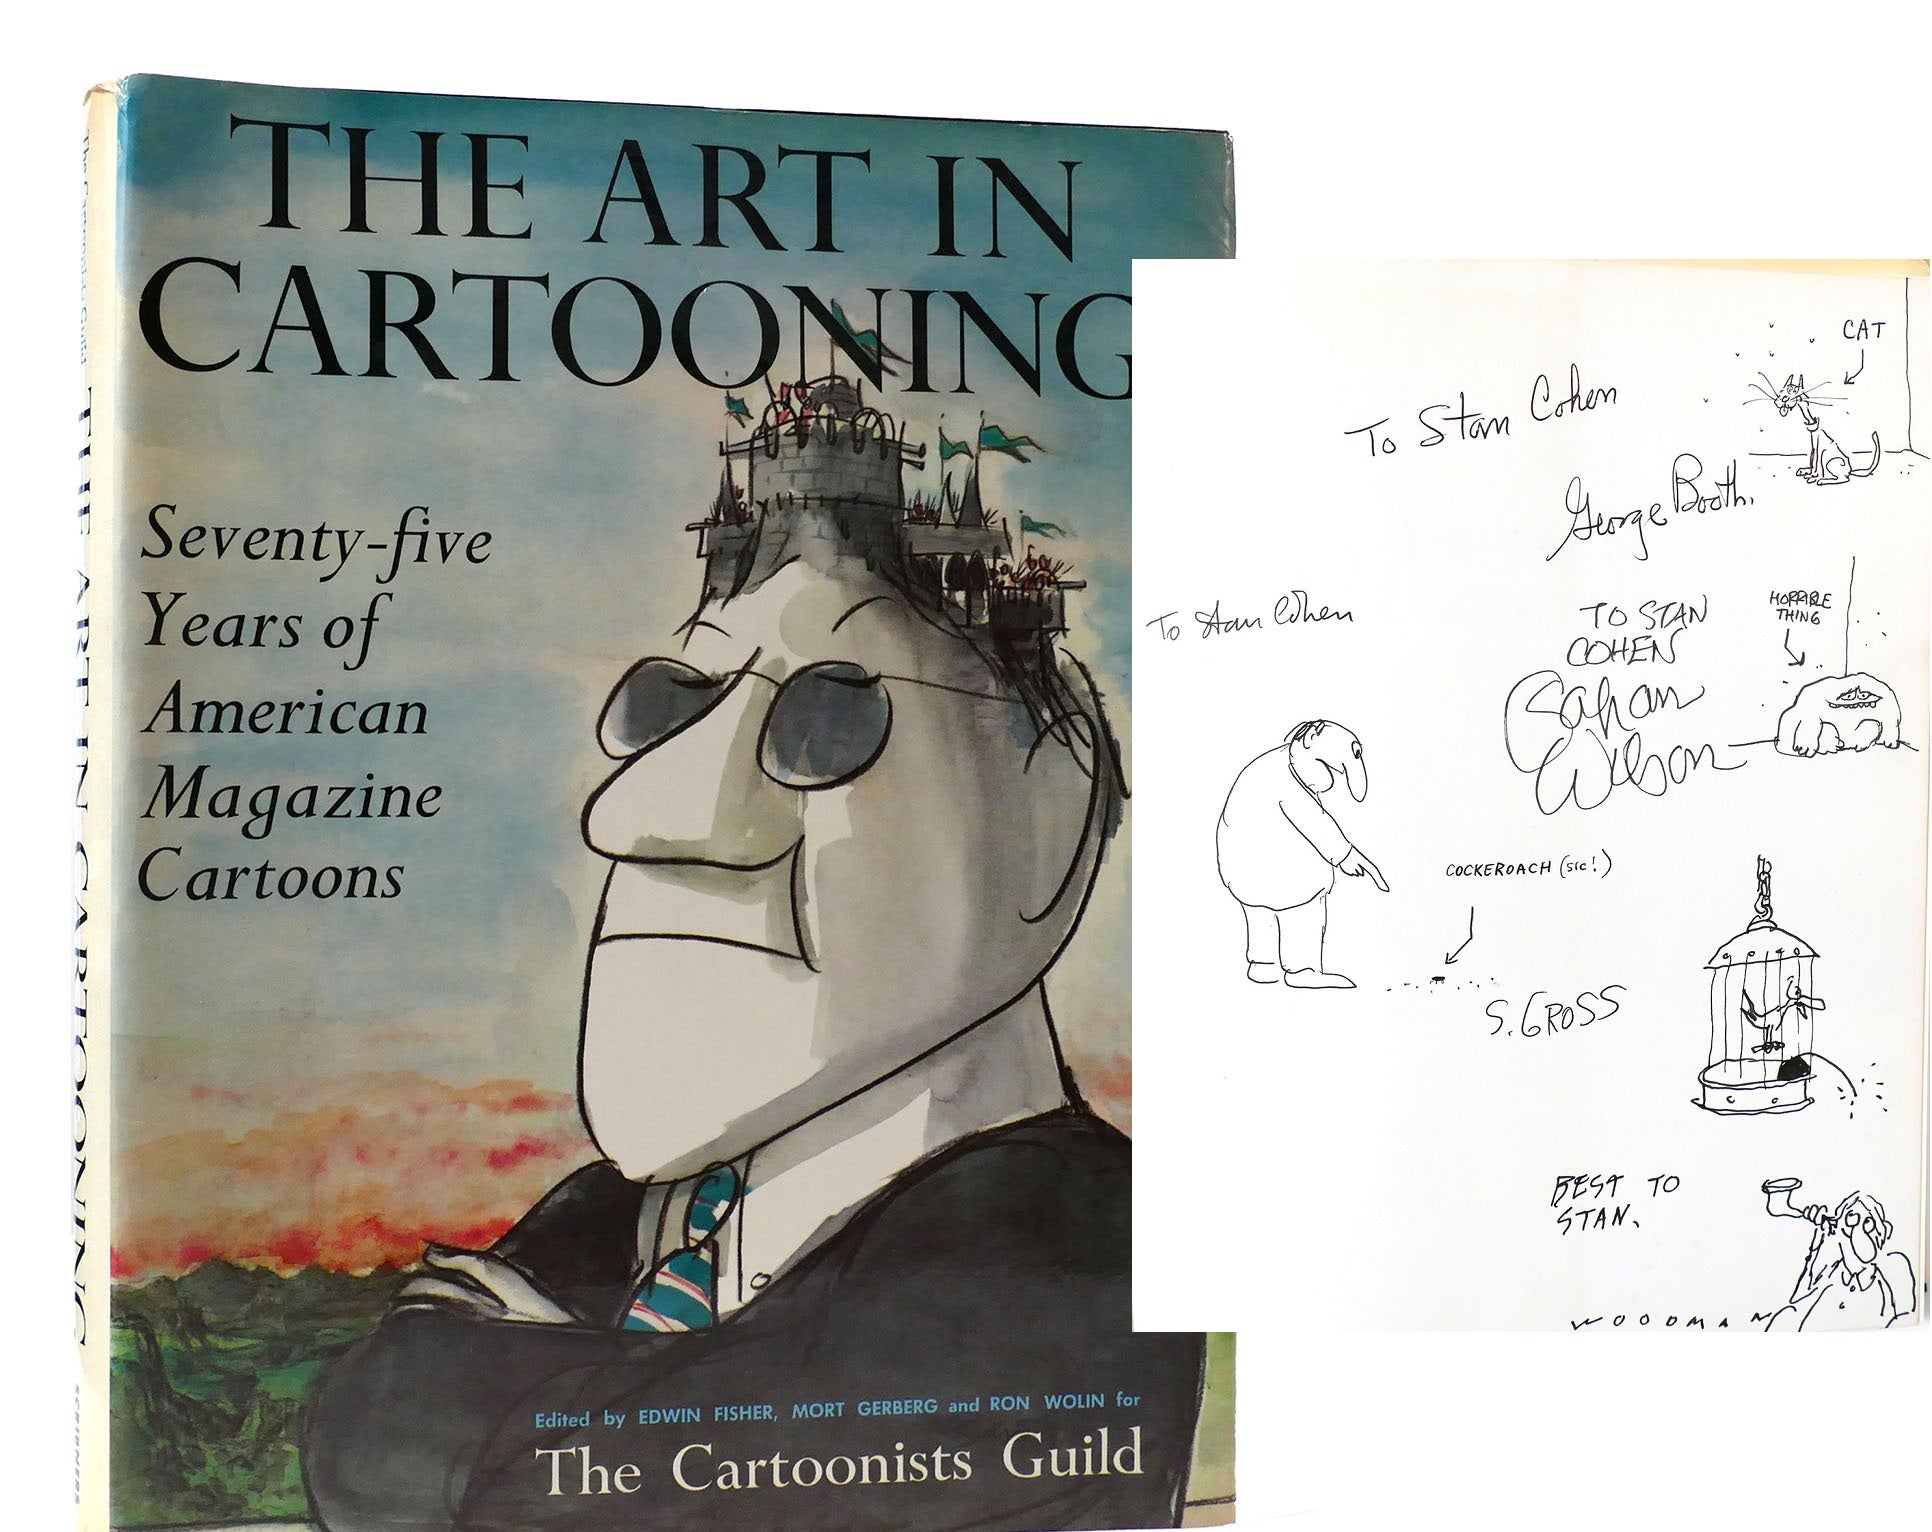 Wolin　First　Mort　First　ART　YEARS　IN　SEVENTY-FIVE　Ron　MAGAZINE　Edwin　Gerberg　Edition;　CARTOONS　OF　Fisher,　CARTOONING:　THE　SIGNED　AMERICAN　Printing